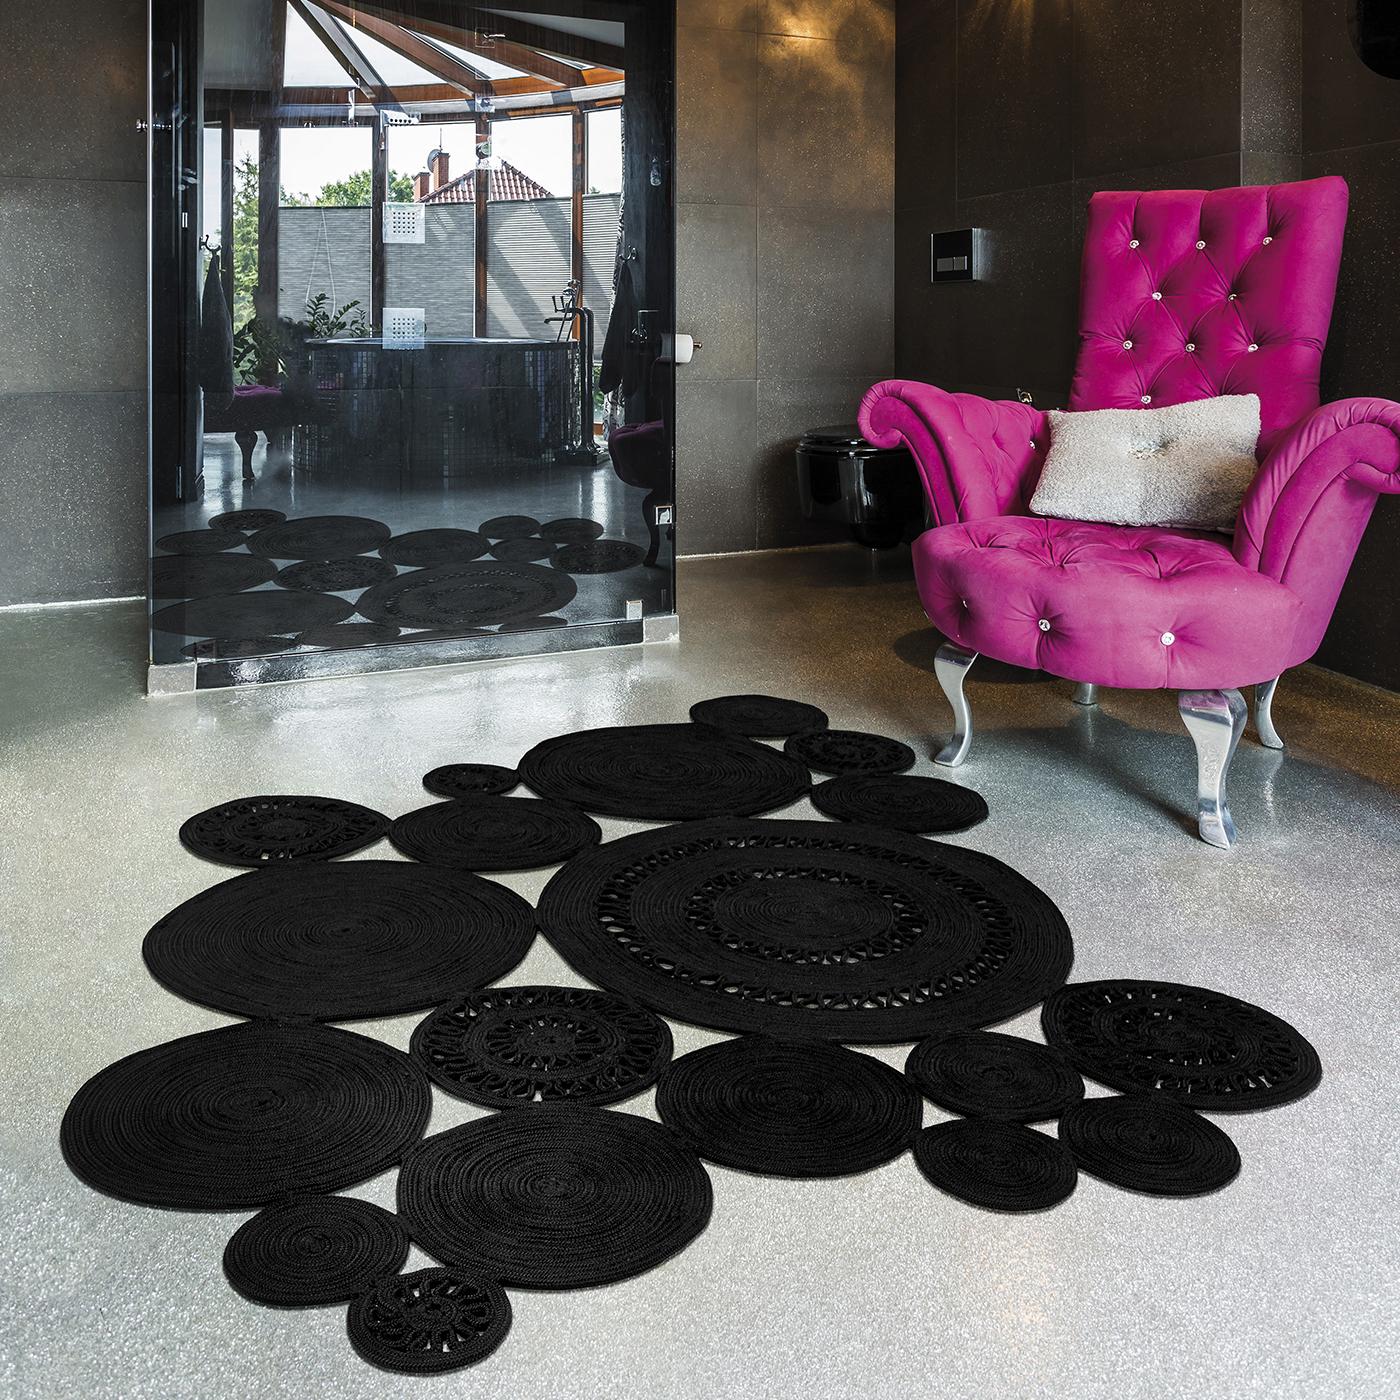 Knotted by hand in polypropylene, the Alyssa patchwork rug can be used both indoors and outside. In a funky patchwork style, the rug is based on a spiral pattern with solid and perforated wheels. Fresh and unconventional, the rug is perfect for use